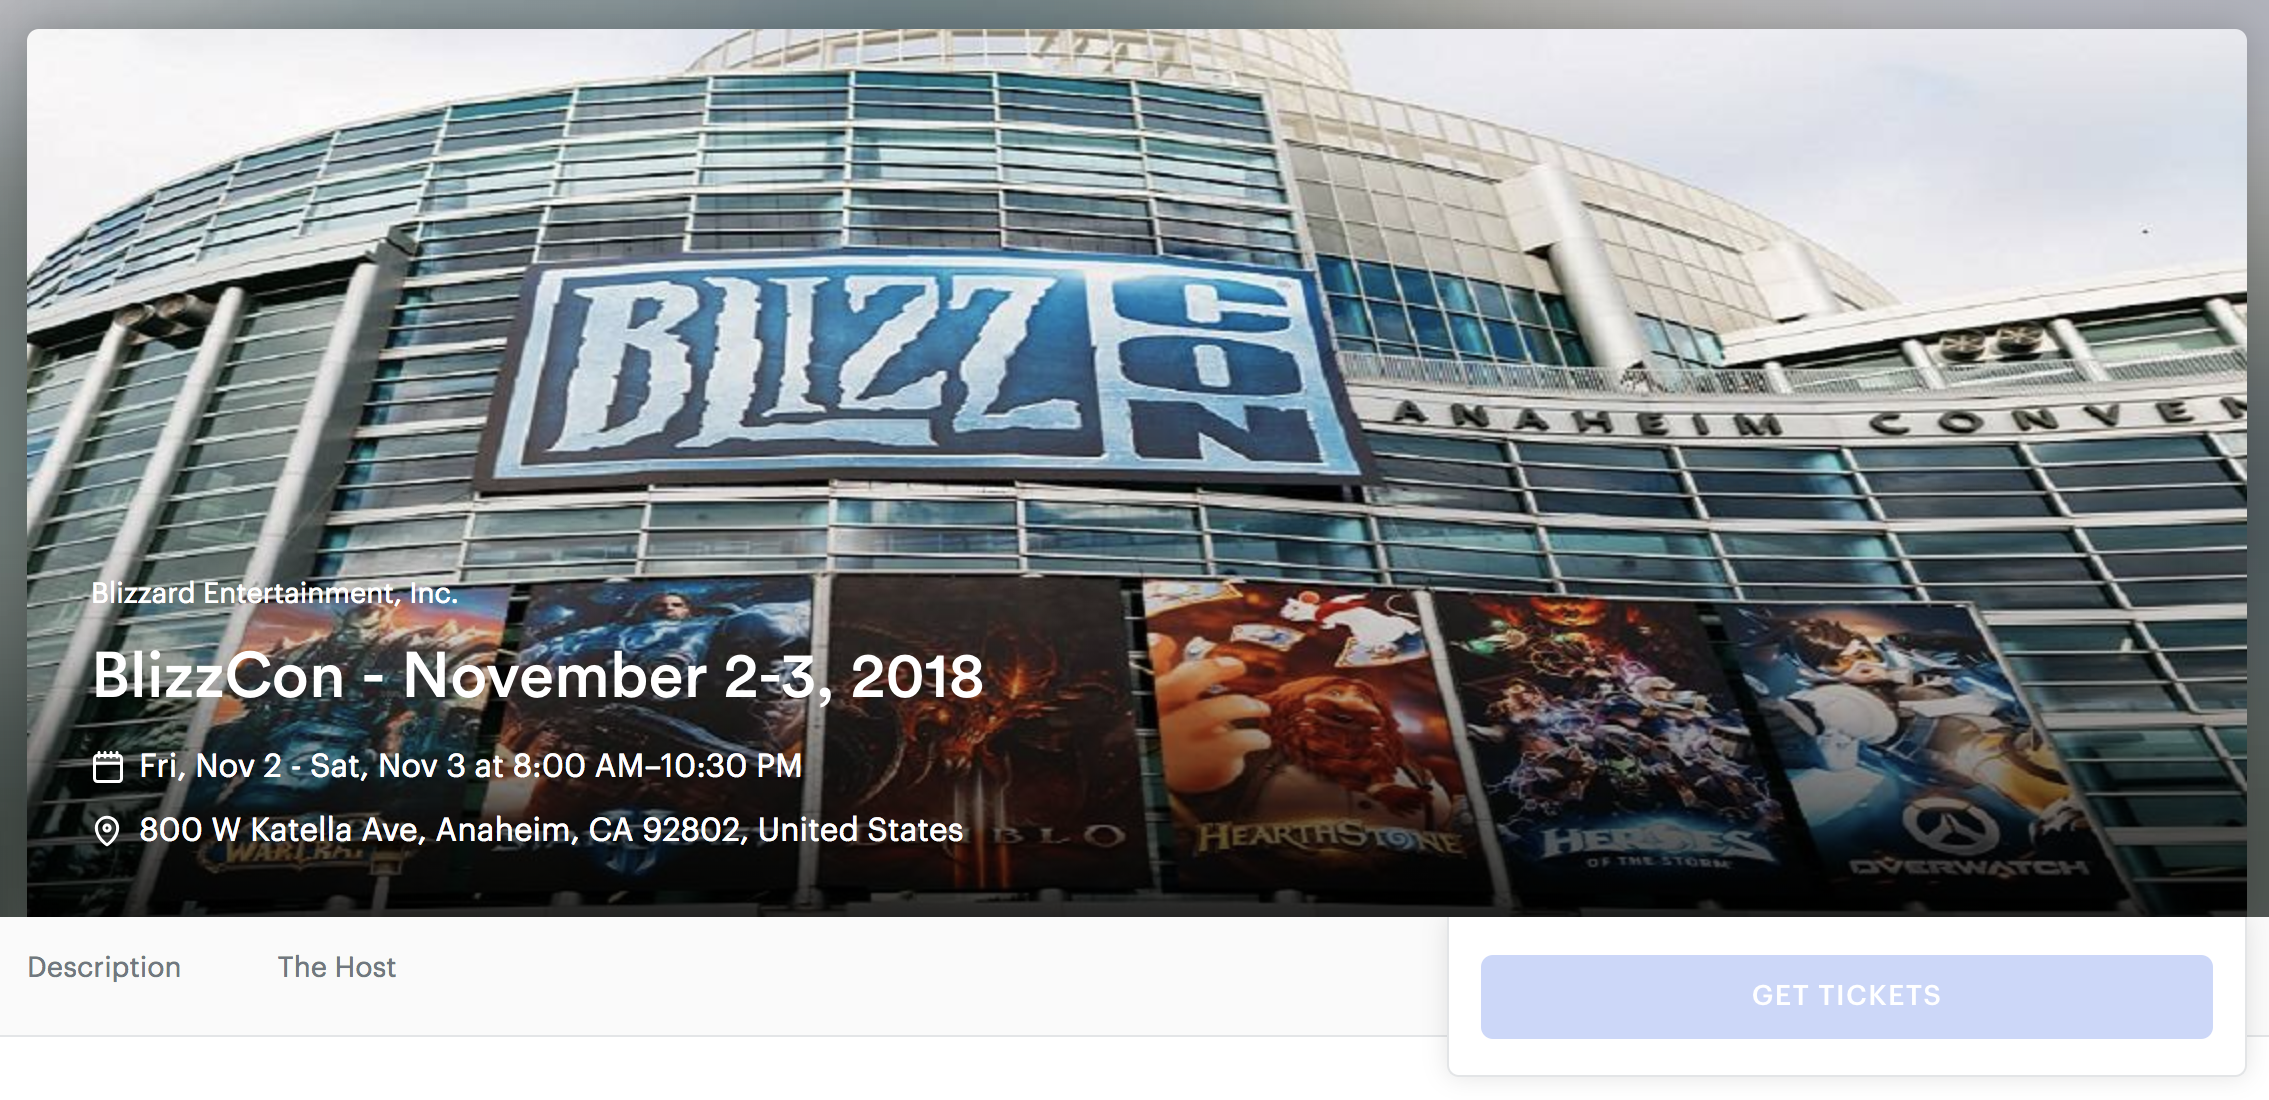 How To Buy Tickets For BlizzCon